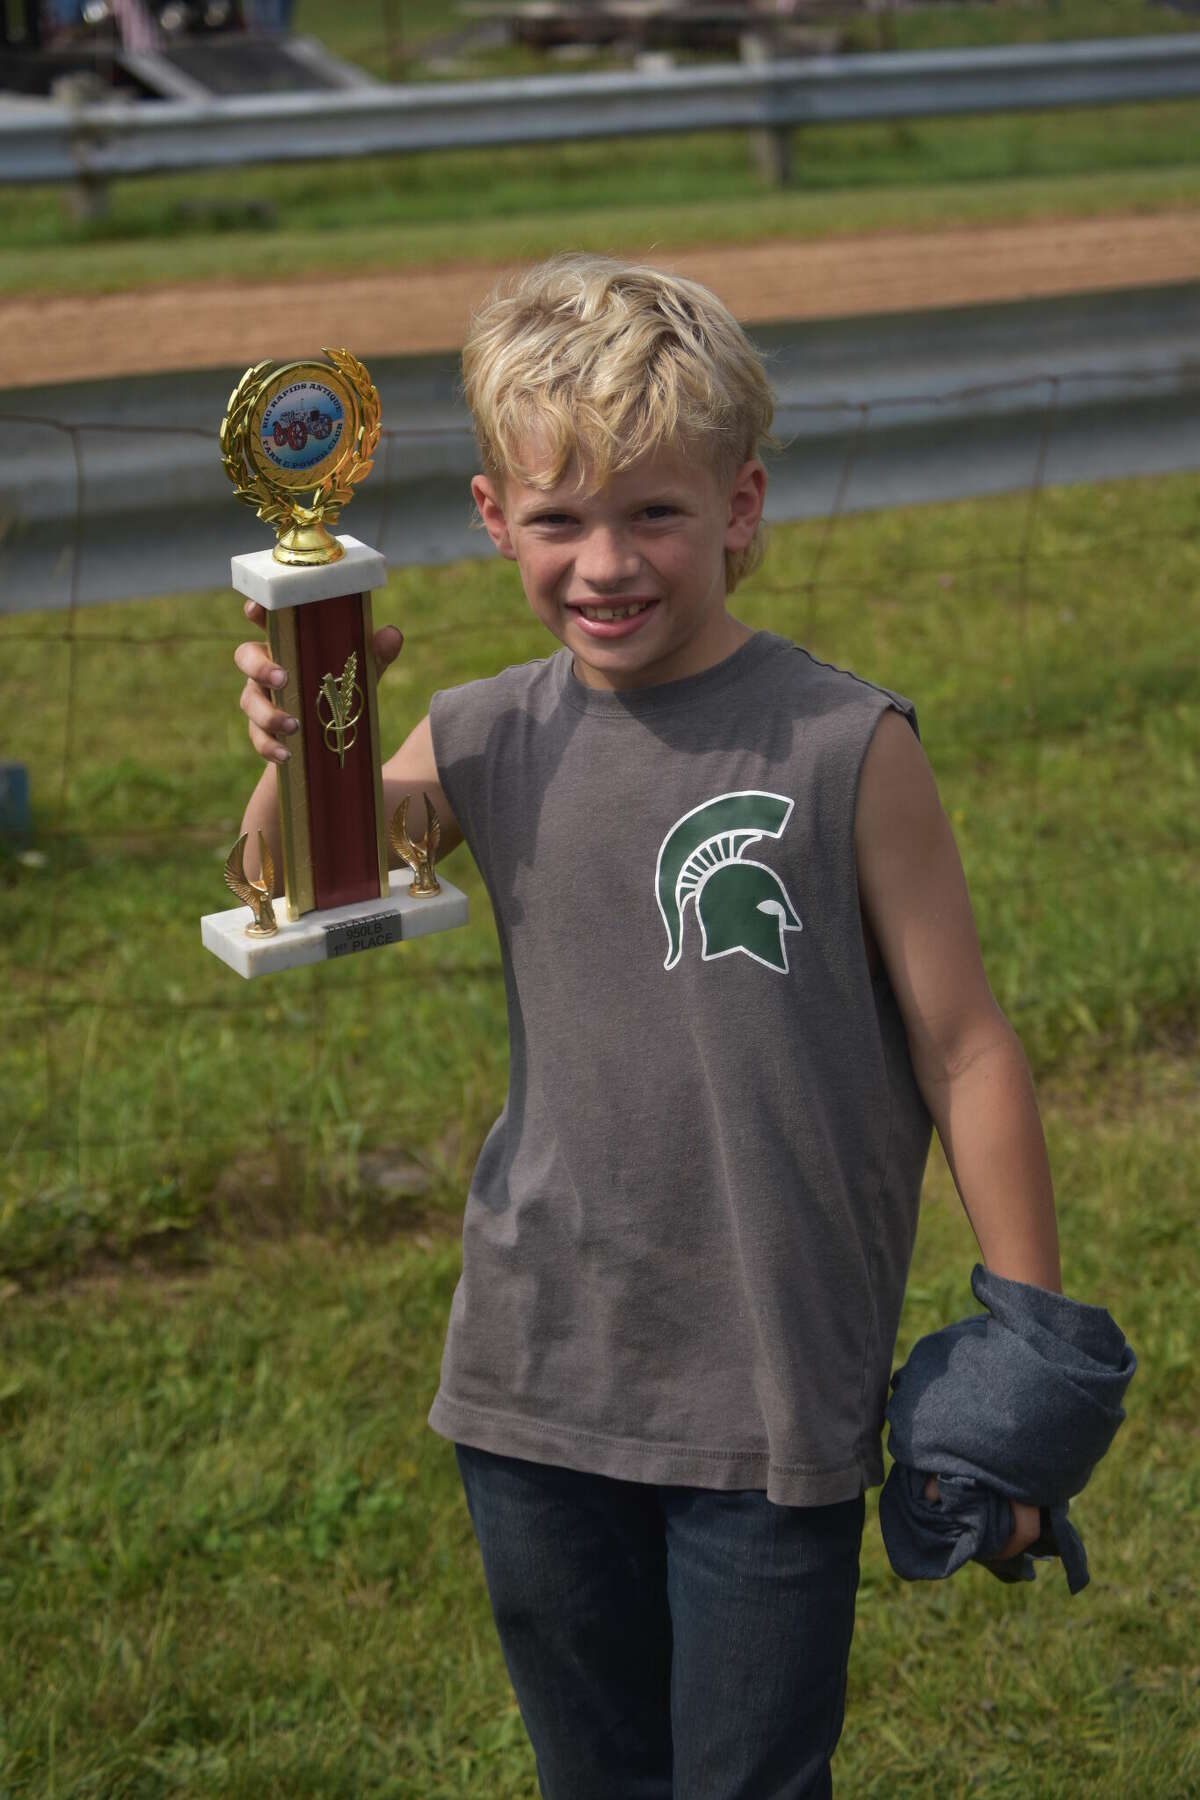 Twenty-six tractors competed in Saturday's tractor pull, wrapping up the season for the Big Rapids Antique Farm and Power Club. Above, 10-year-old Nate, won the 850 and 950 pound twin categories.